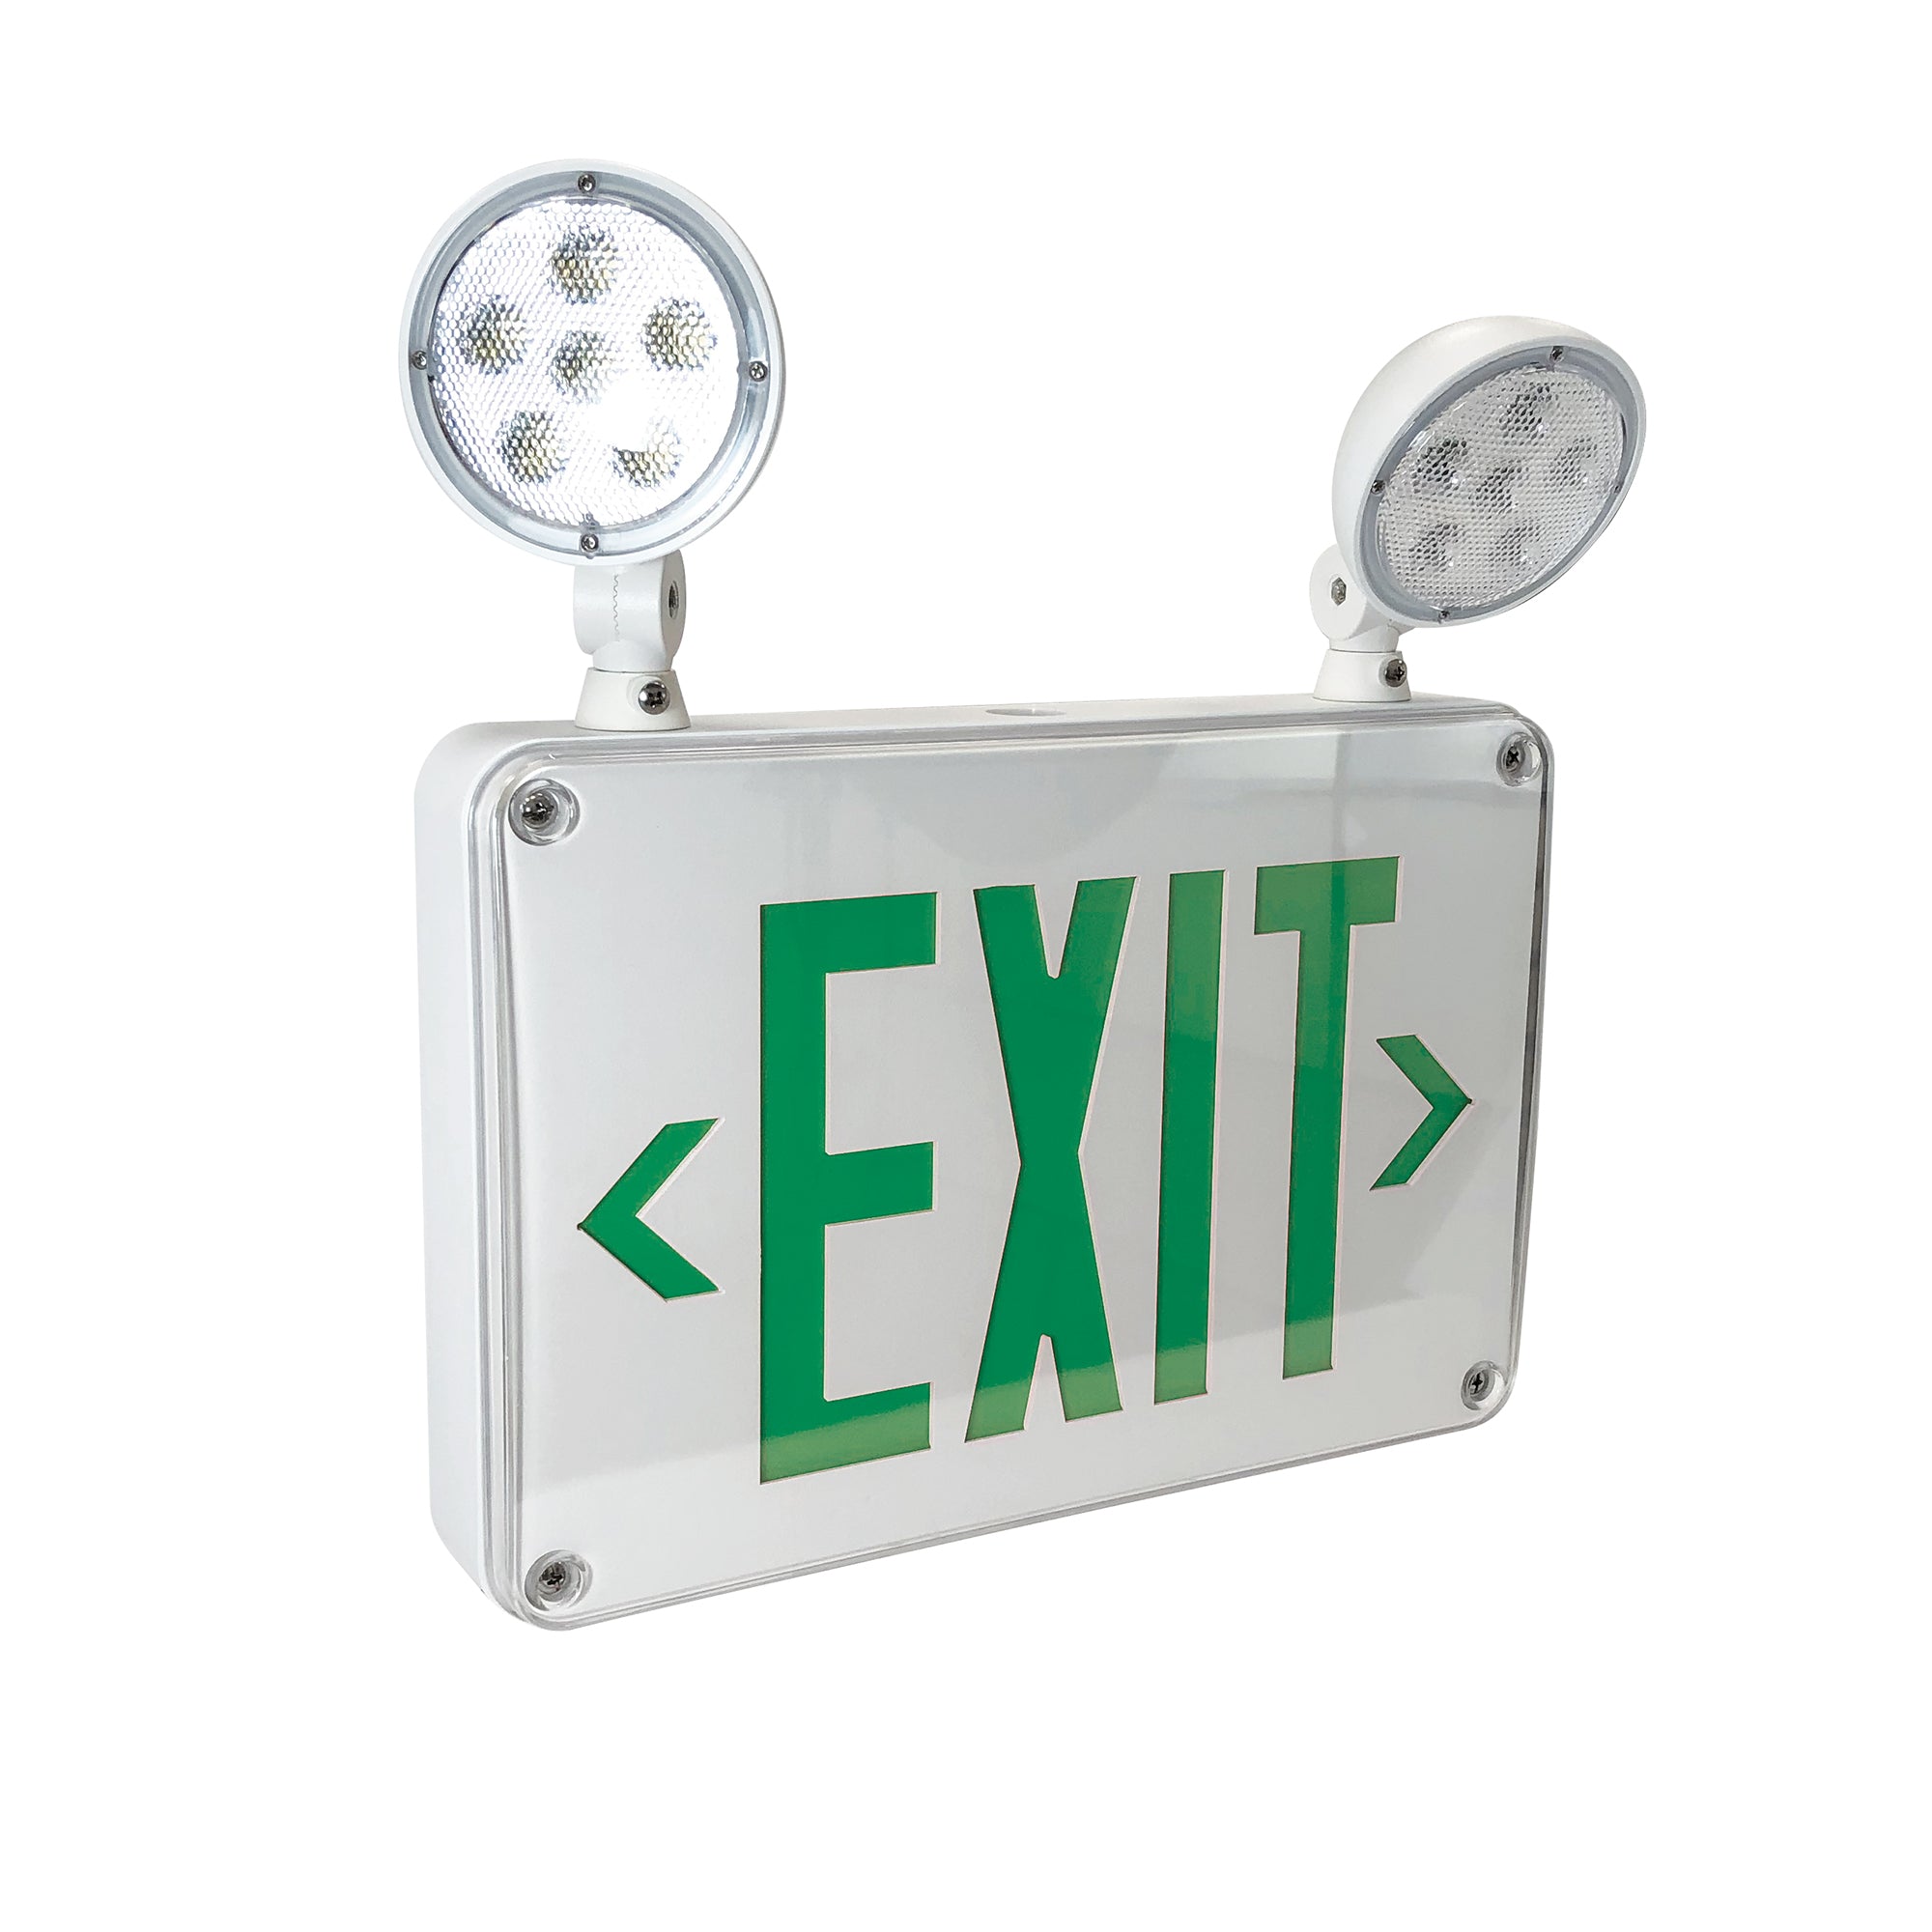 Nora Lighting NEX-720-LED/G-CC LED Self-Diagnostic Wet/Cold Location Exit & Emergency Sign With Battery Backup & Remote Capability Housing With Green Letters, Cold Weather Location - White